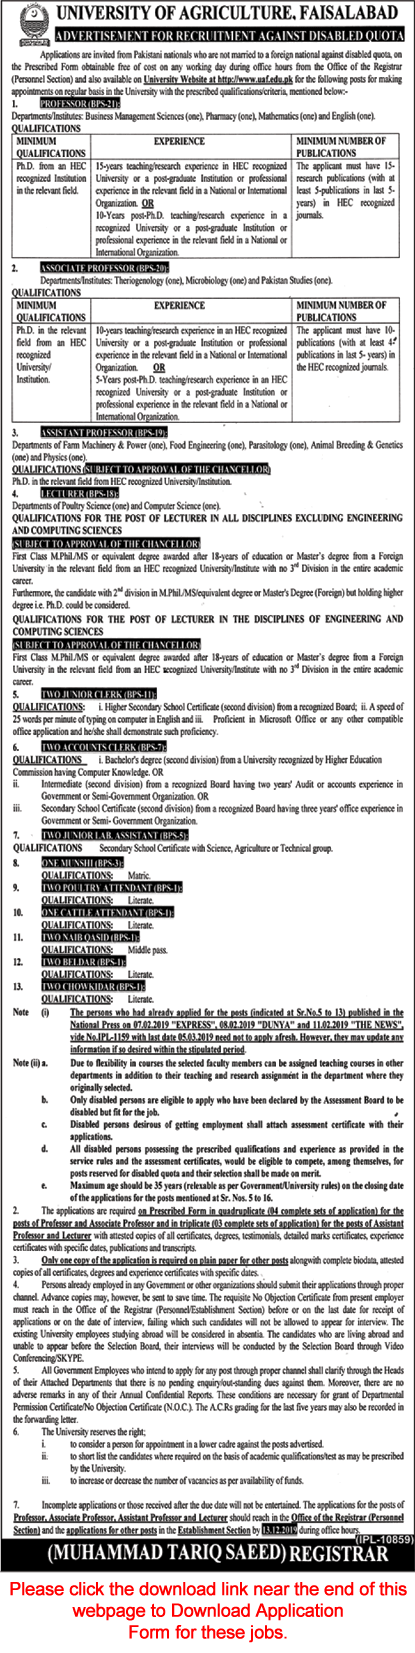 University of Agriculture Faisalabad Jobs November 2019 Application Form Teaching Faculty & Others Latest